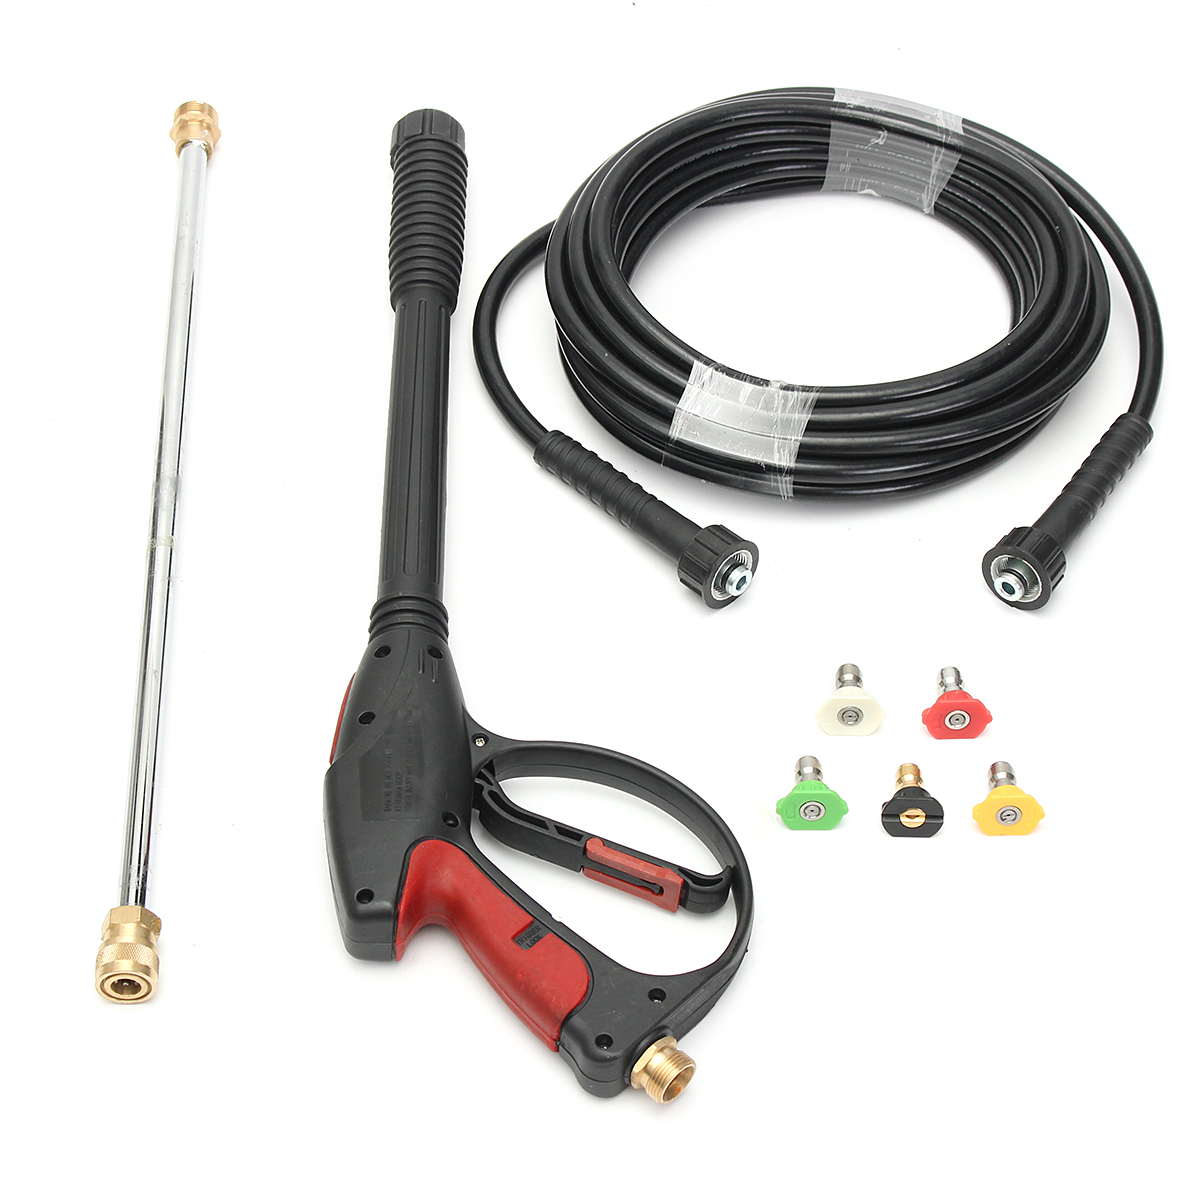 Details about   3000PSI High Pressure Car Power Washer Spray Gun Wand Lance Nozzle Tips Hose Kit 